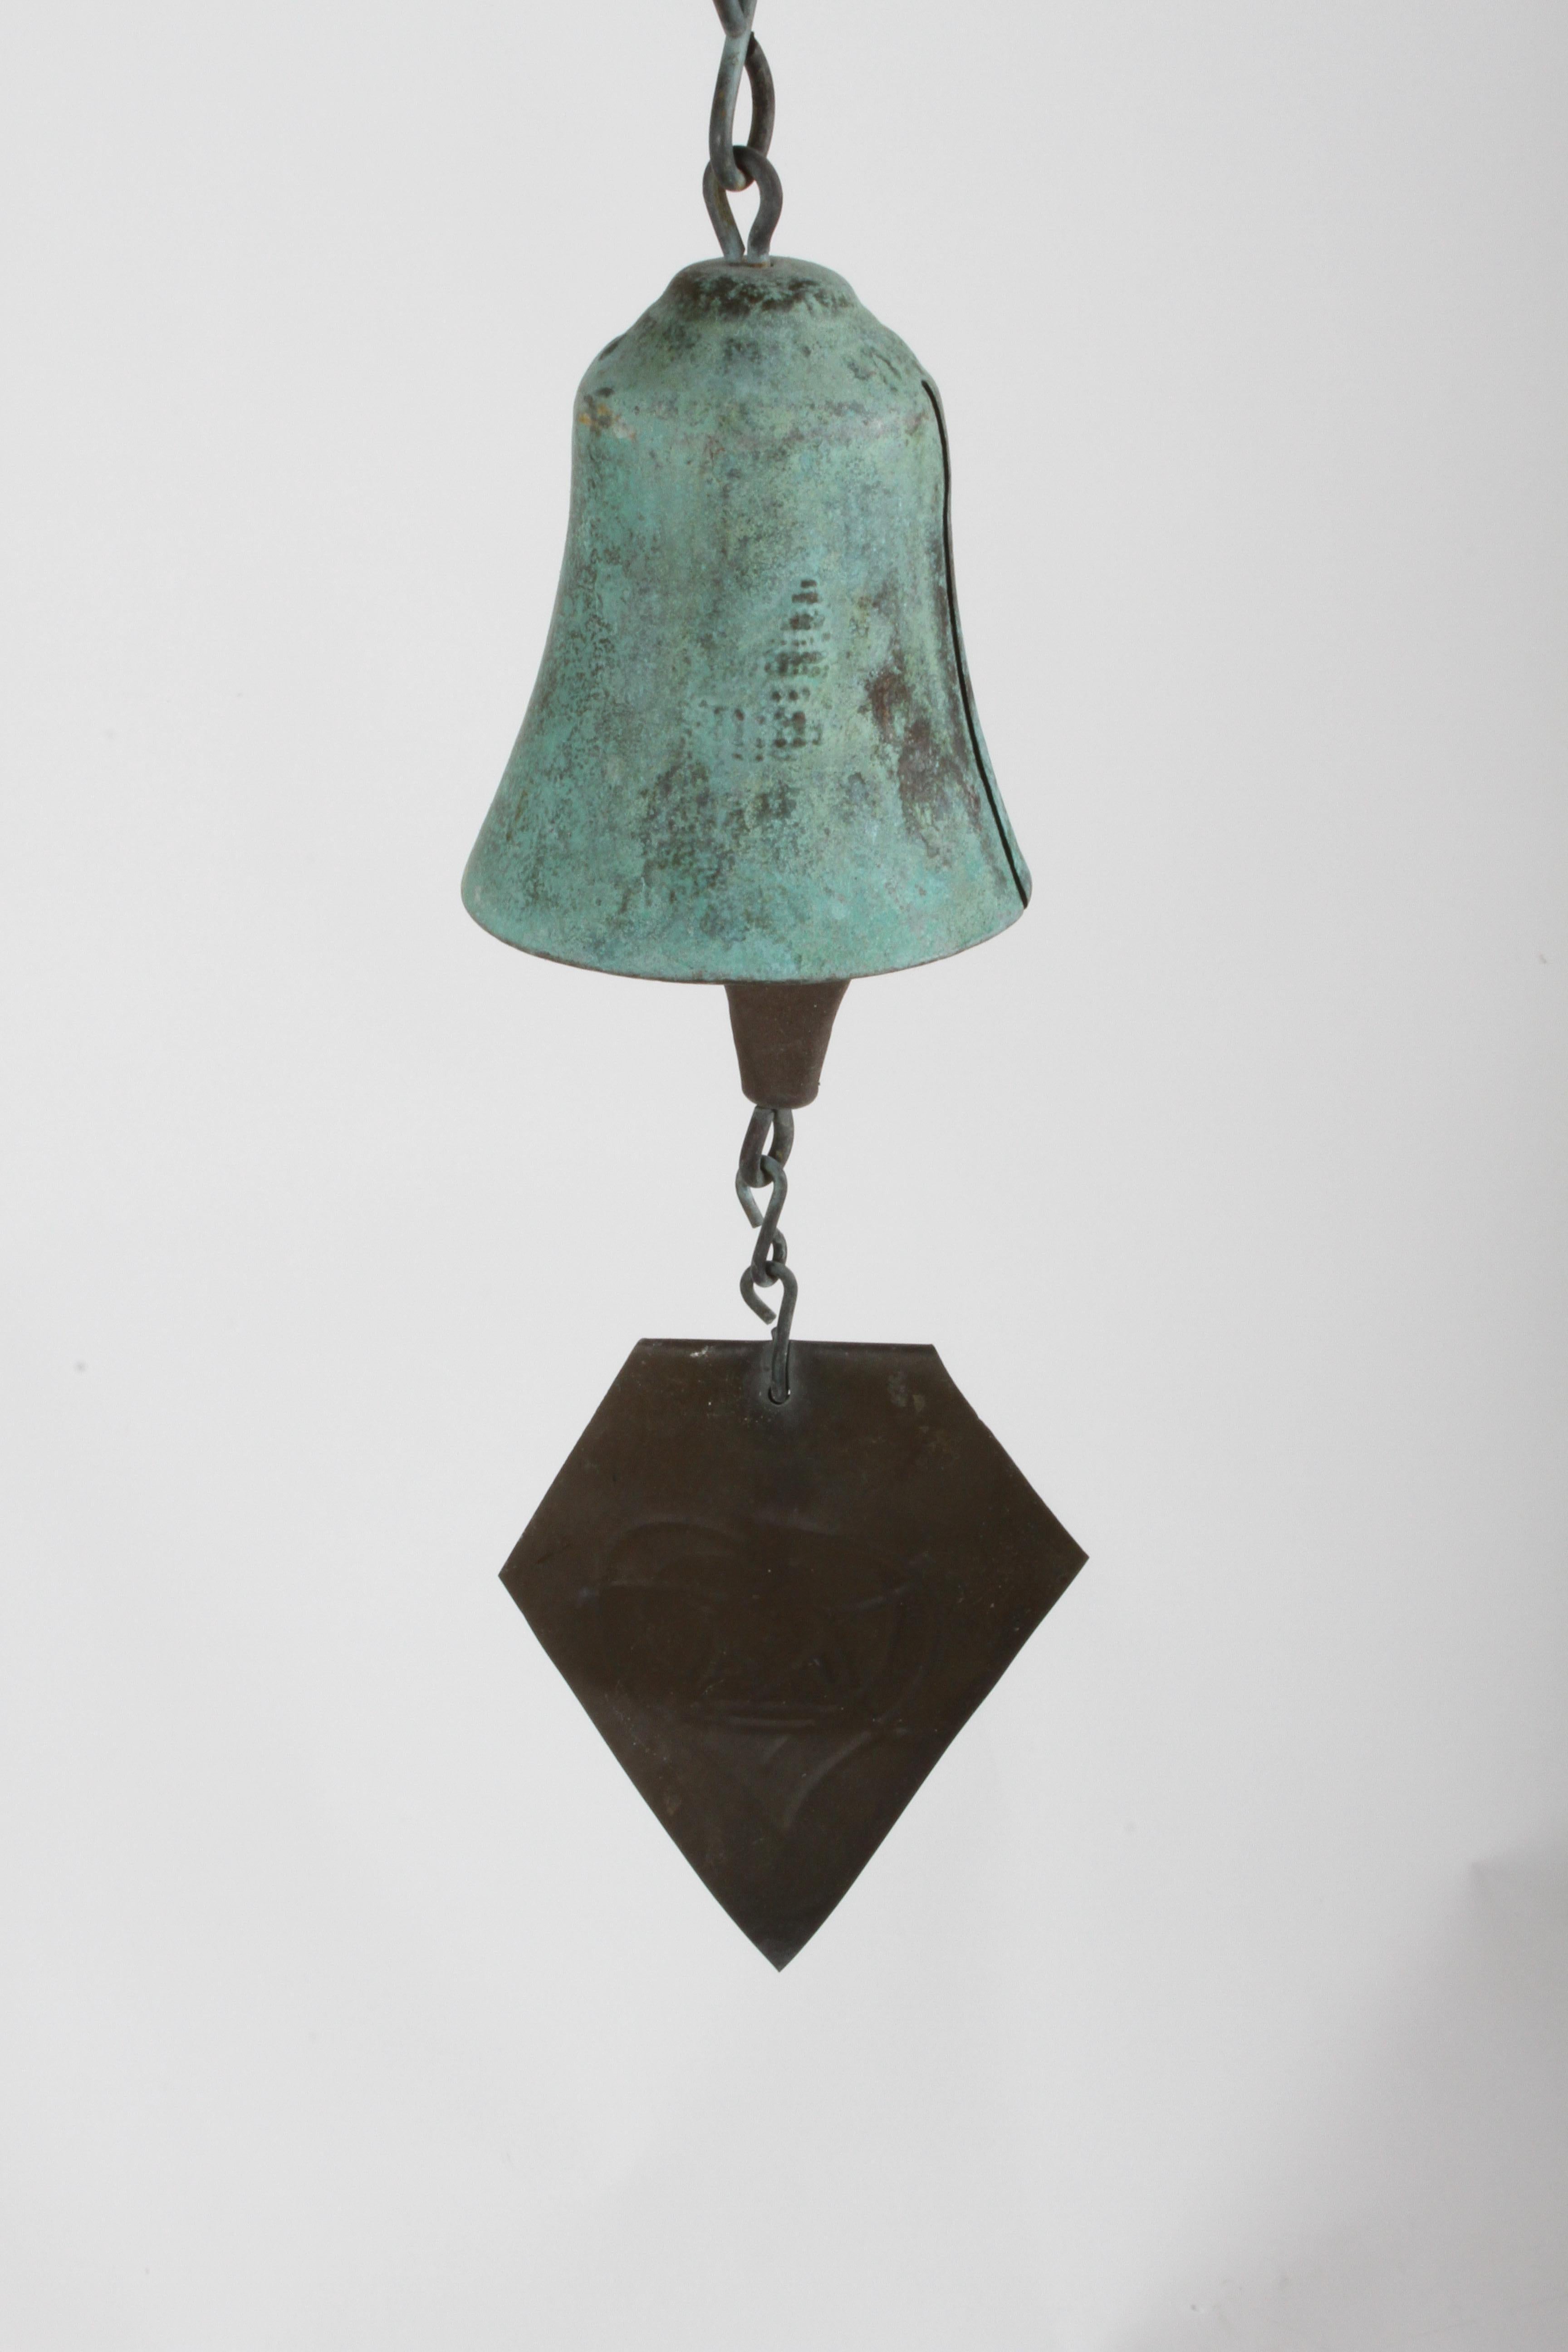 Vintage cast bronze sculptural wind chime or bell with great patina by Jeff Cross (d.1977) of Harmony Hollow Bells, in the style of architect and artist, Paolo Soleri. Nice condition, great patina.